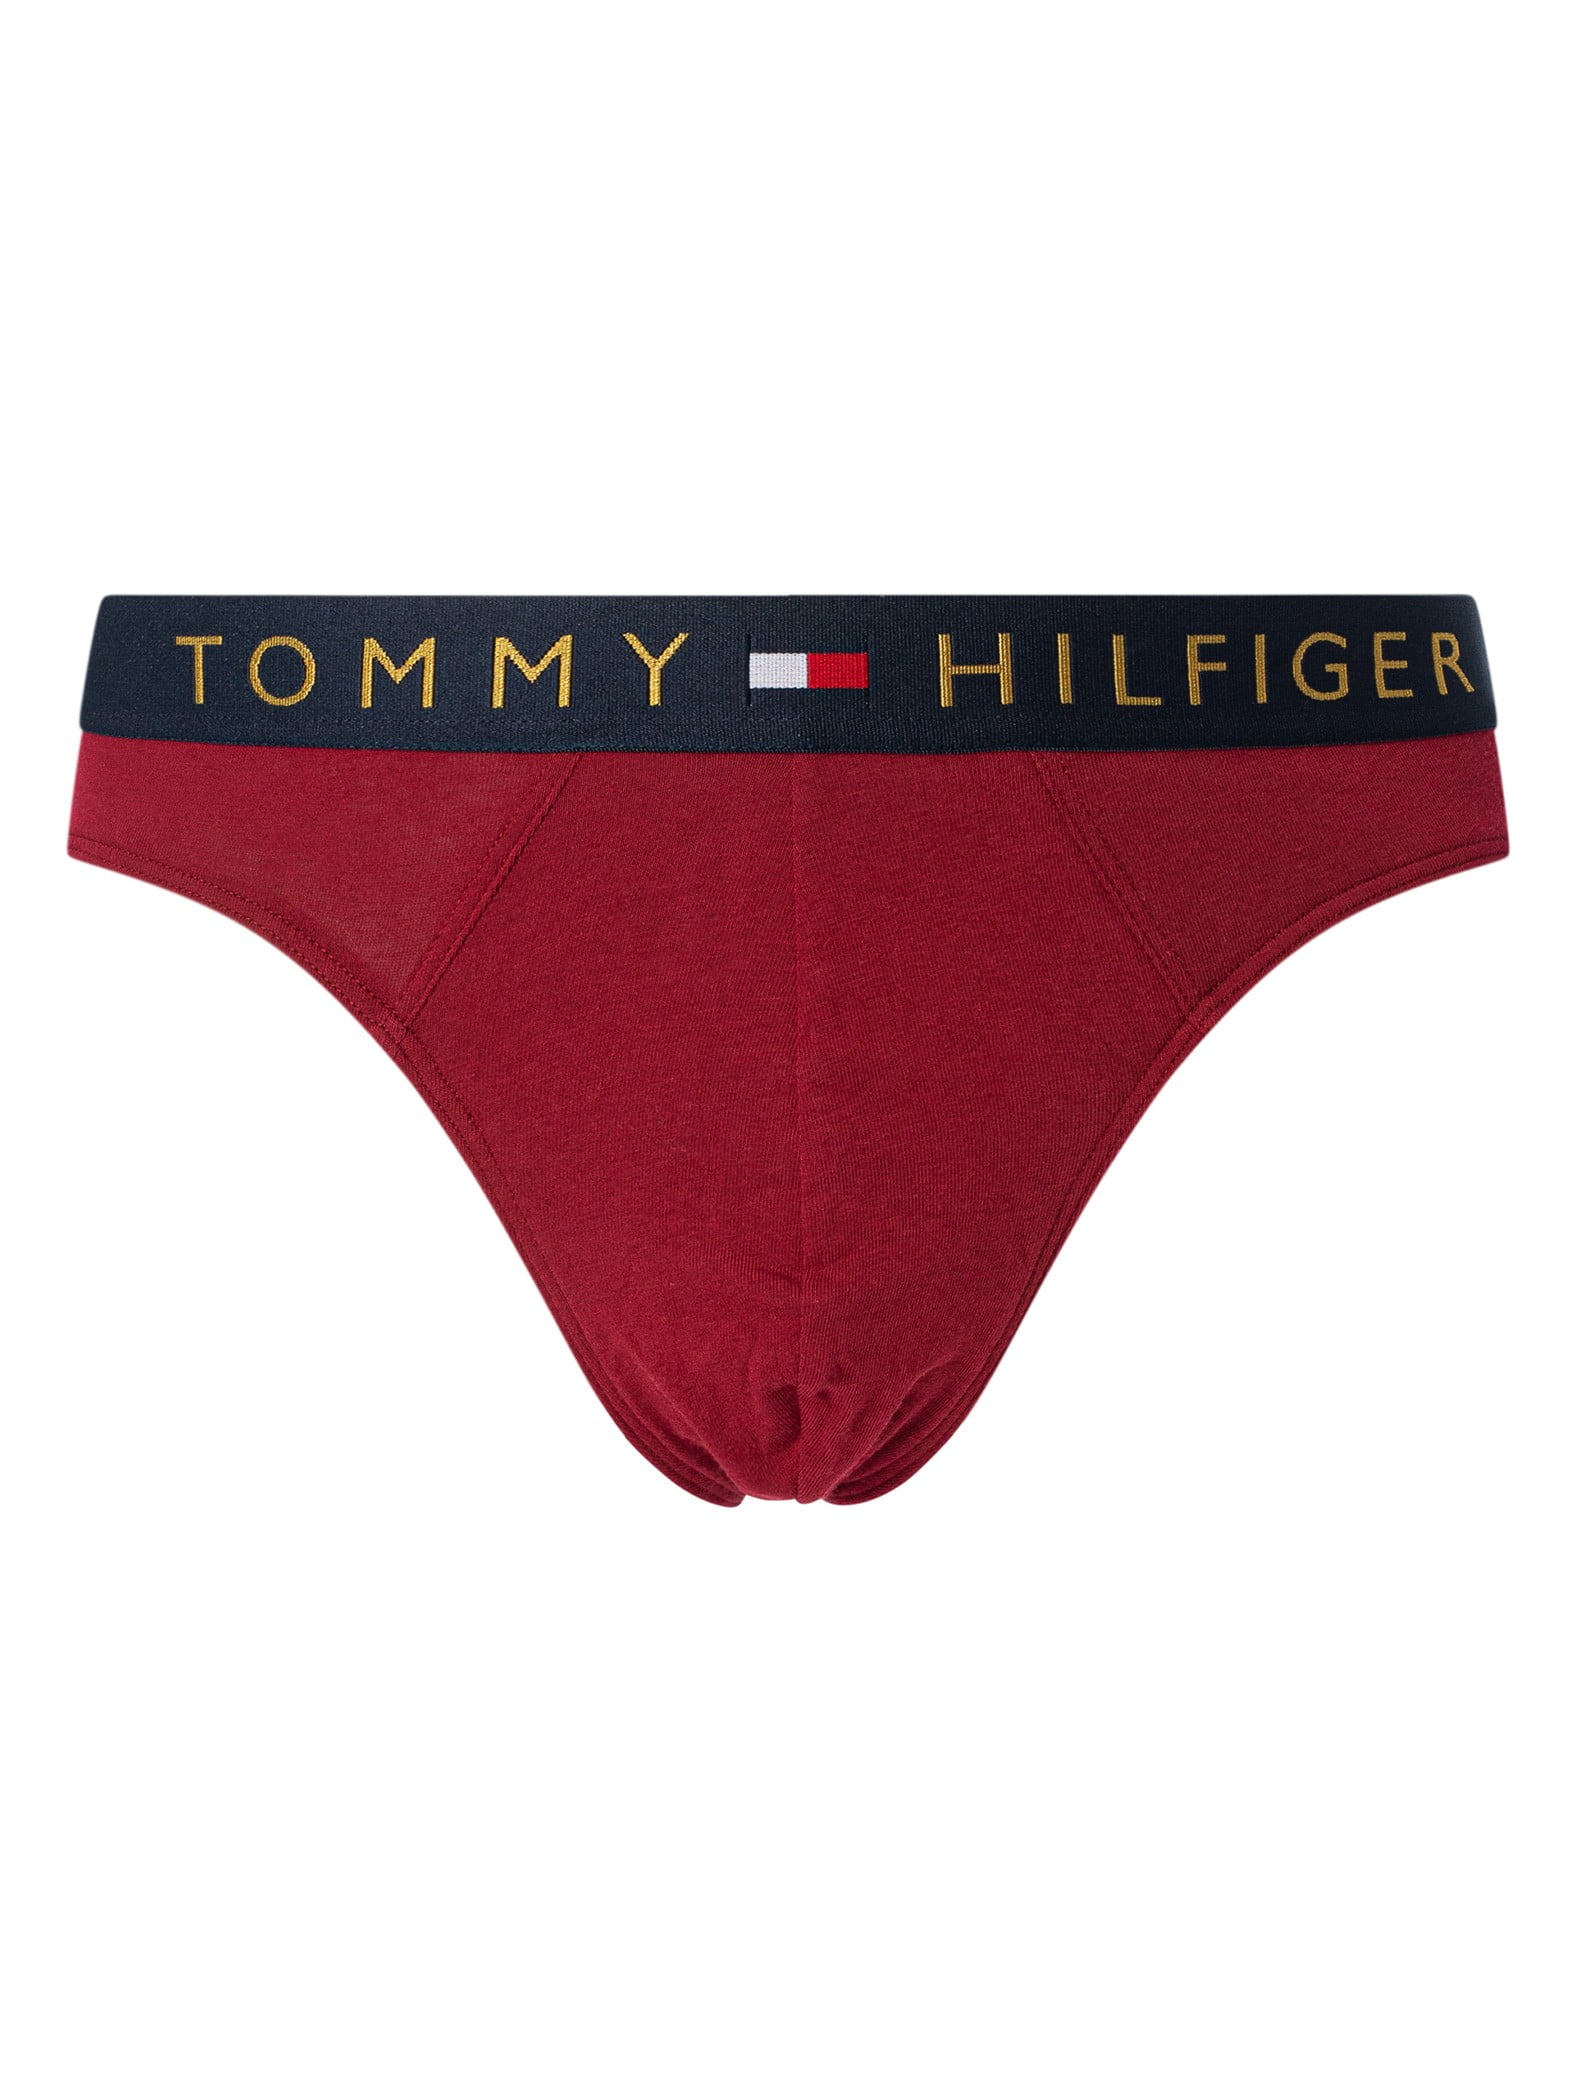 Pack 5 WB Multicoloured Hilfiger Briefs, Tommy Gold